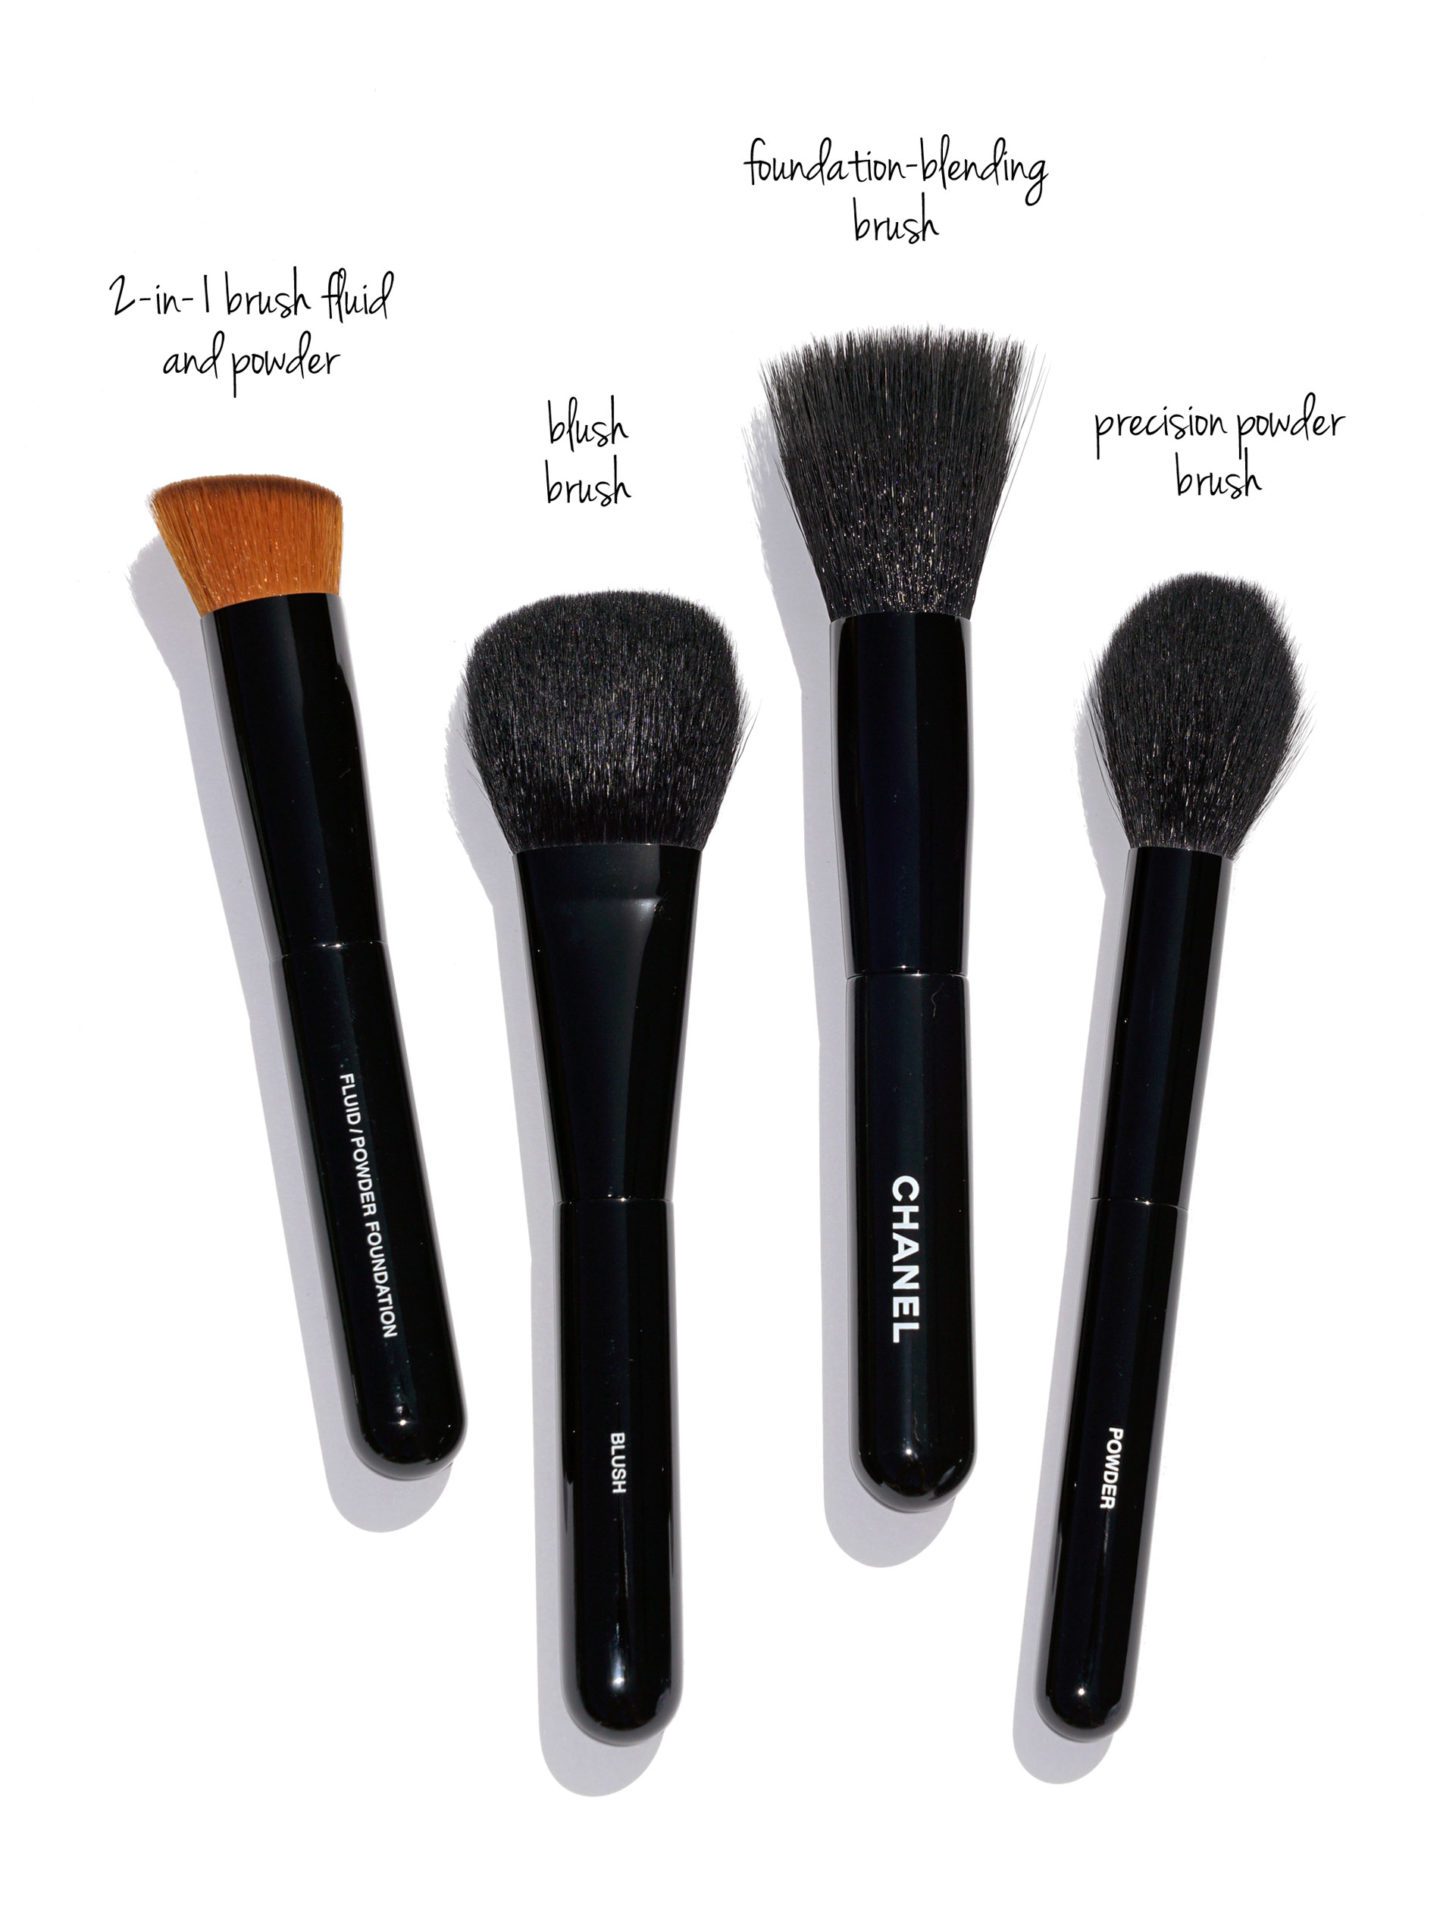 Chanel Makeup Brushes | The Beauty Look Book